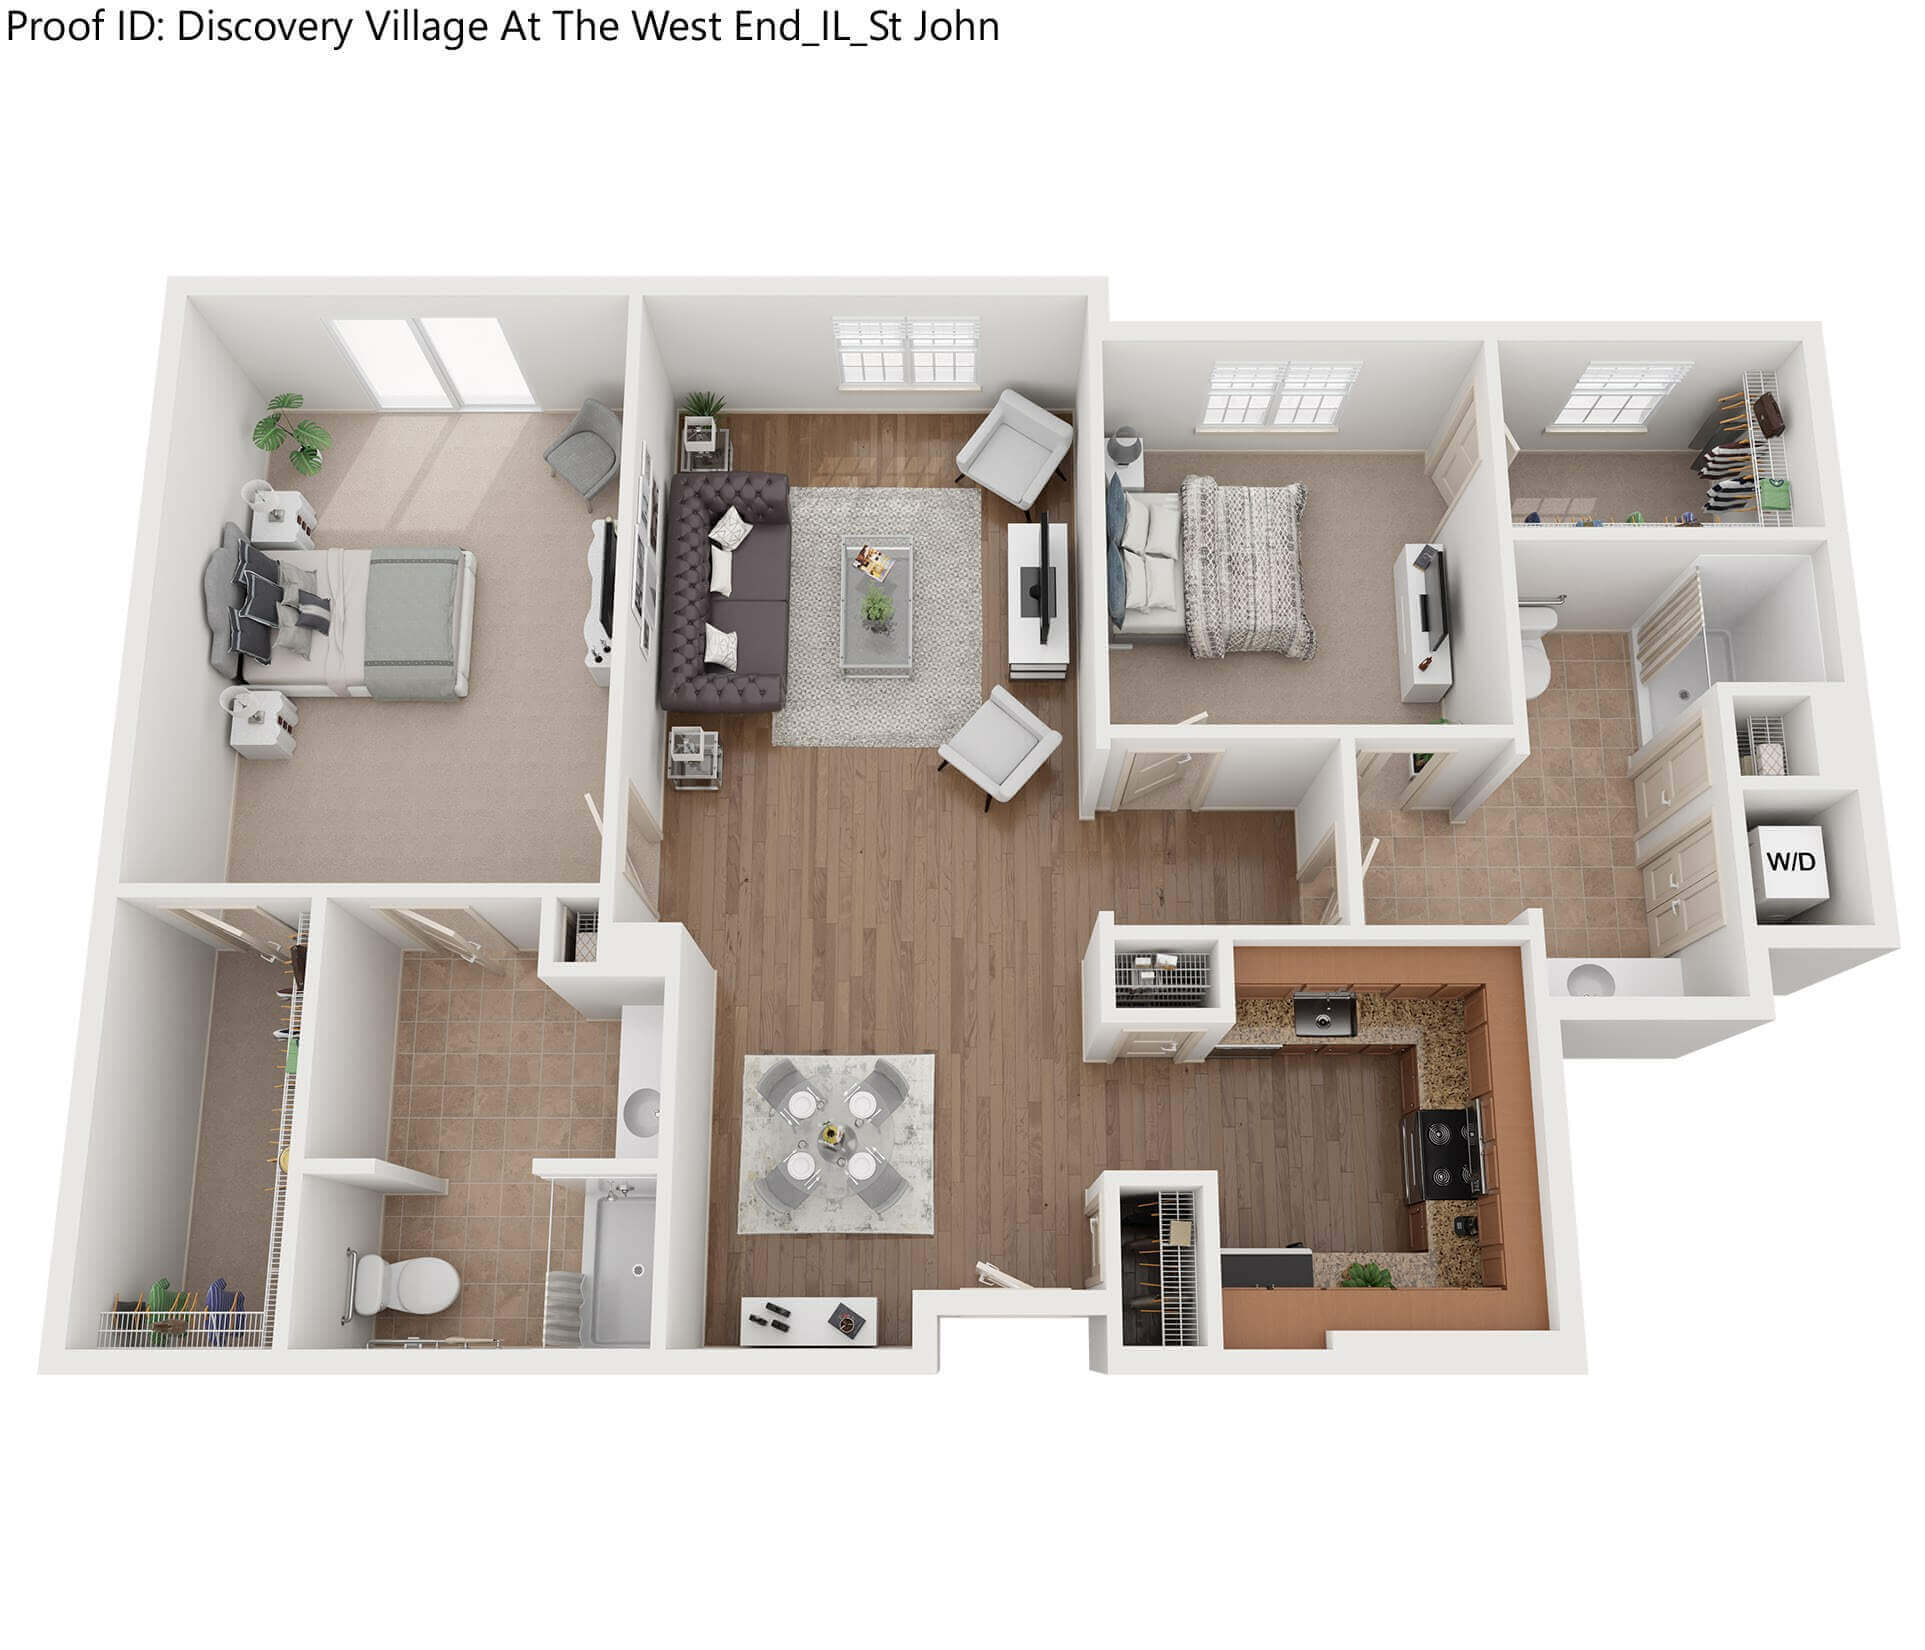 Discovery-Village-At-The-West-End-3D-Proof-2-JPEG_Page_09